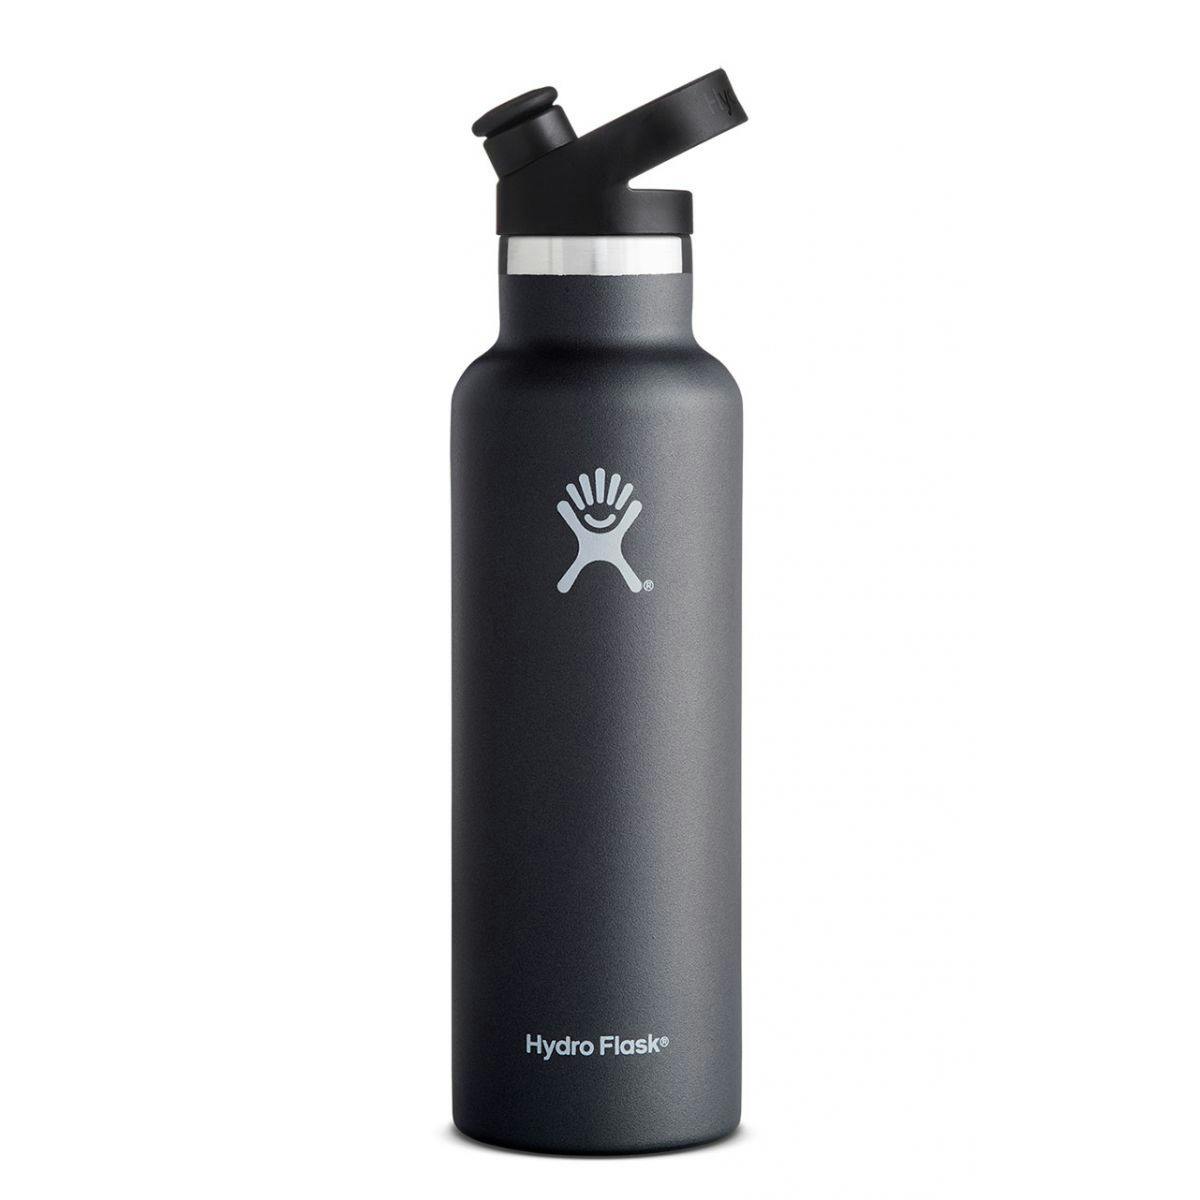 https://activejunky-cdn.s3.amazonaws.com/aj-content/hydro-flask-stainless-steel-vacuum-insulated-water-bottle-21-oz-standard-mouth-sport-cap-black.jpg